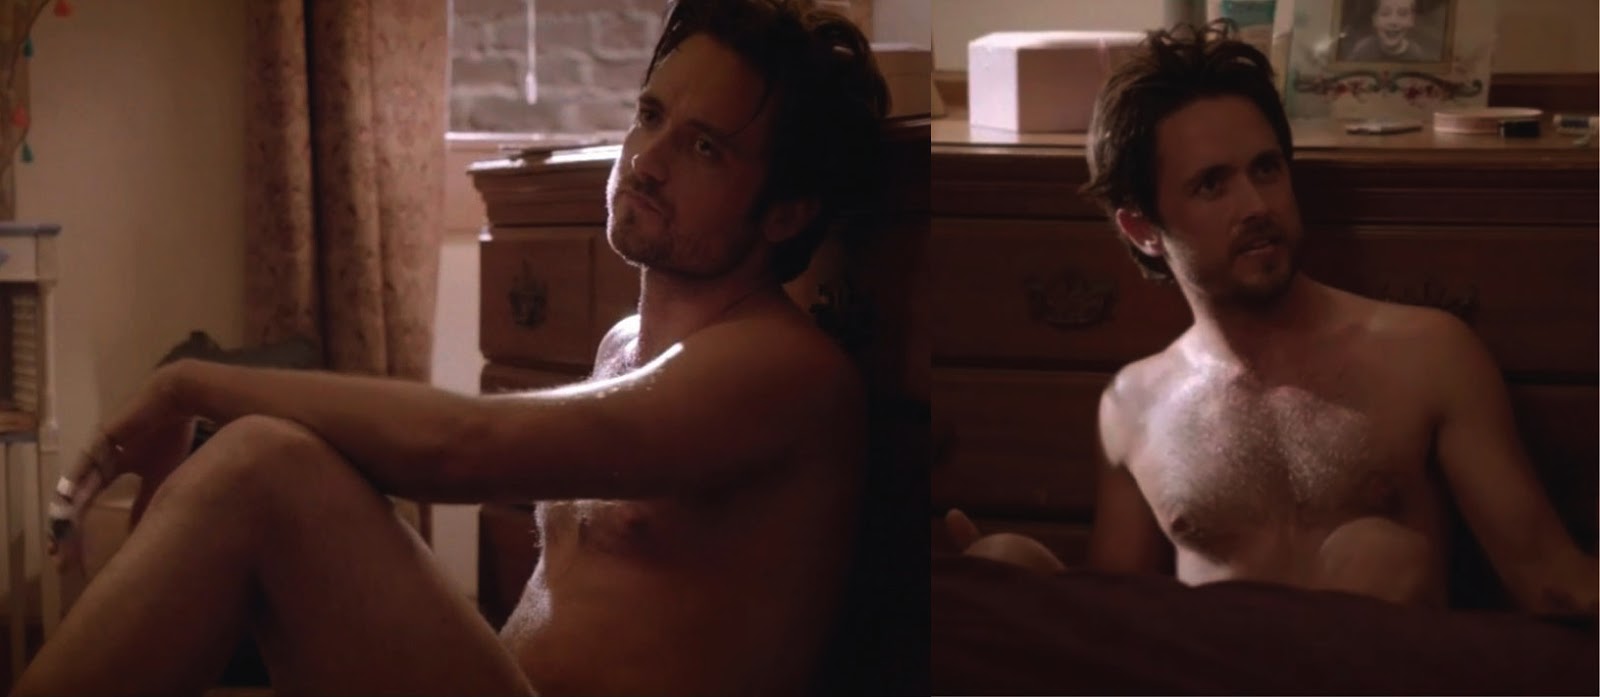 Justin Chatwin Nude